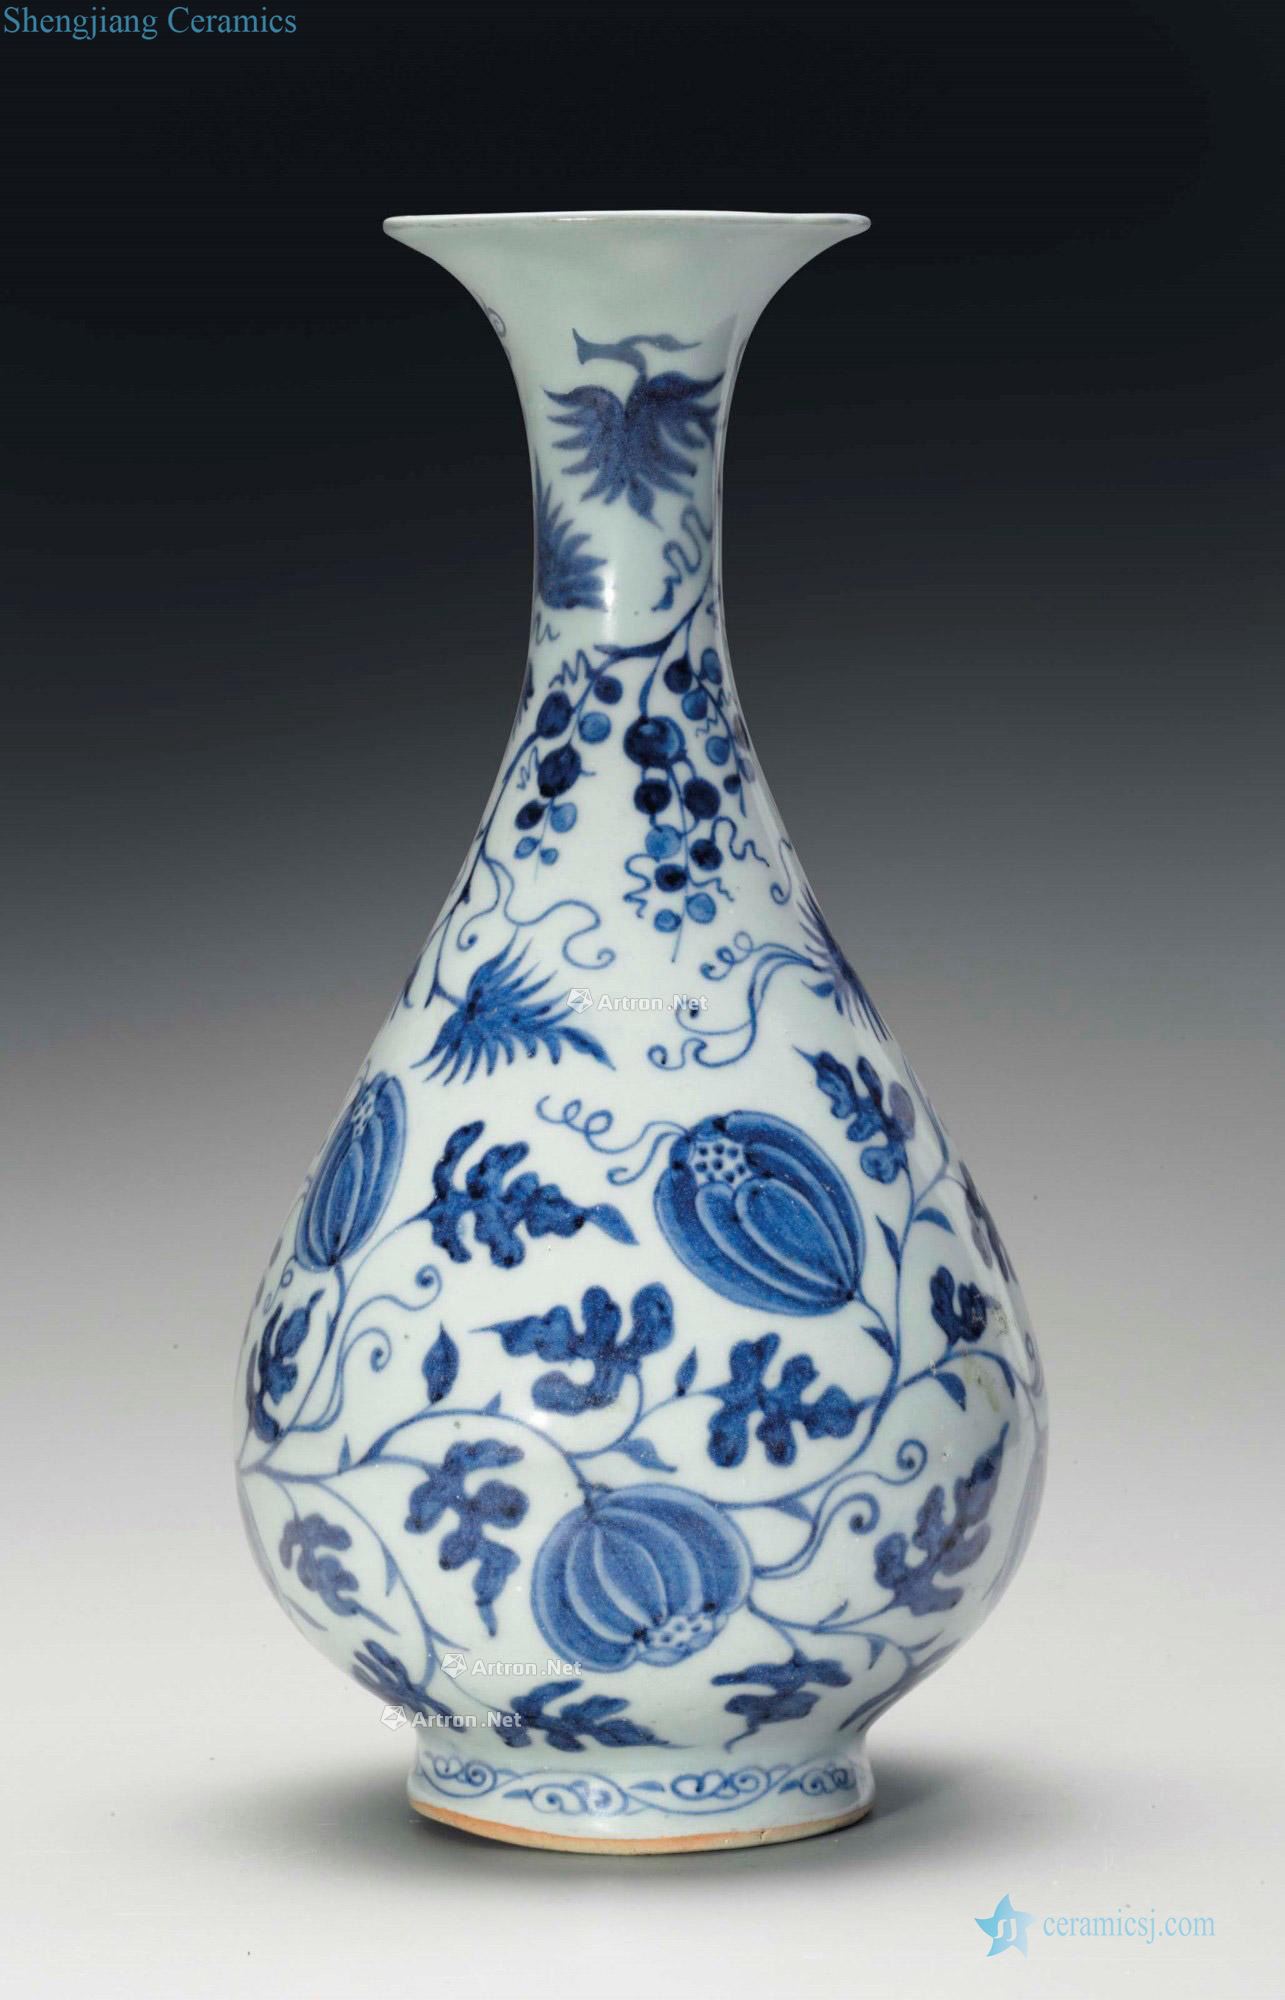 YUAN DYNASTY (1279 ~ 1279) is A VERY RARE BLUE AND WHITE PEAR - SHAPED BOTTLE VASE, YUHUCHUNPING